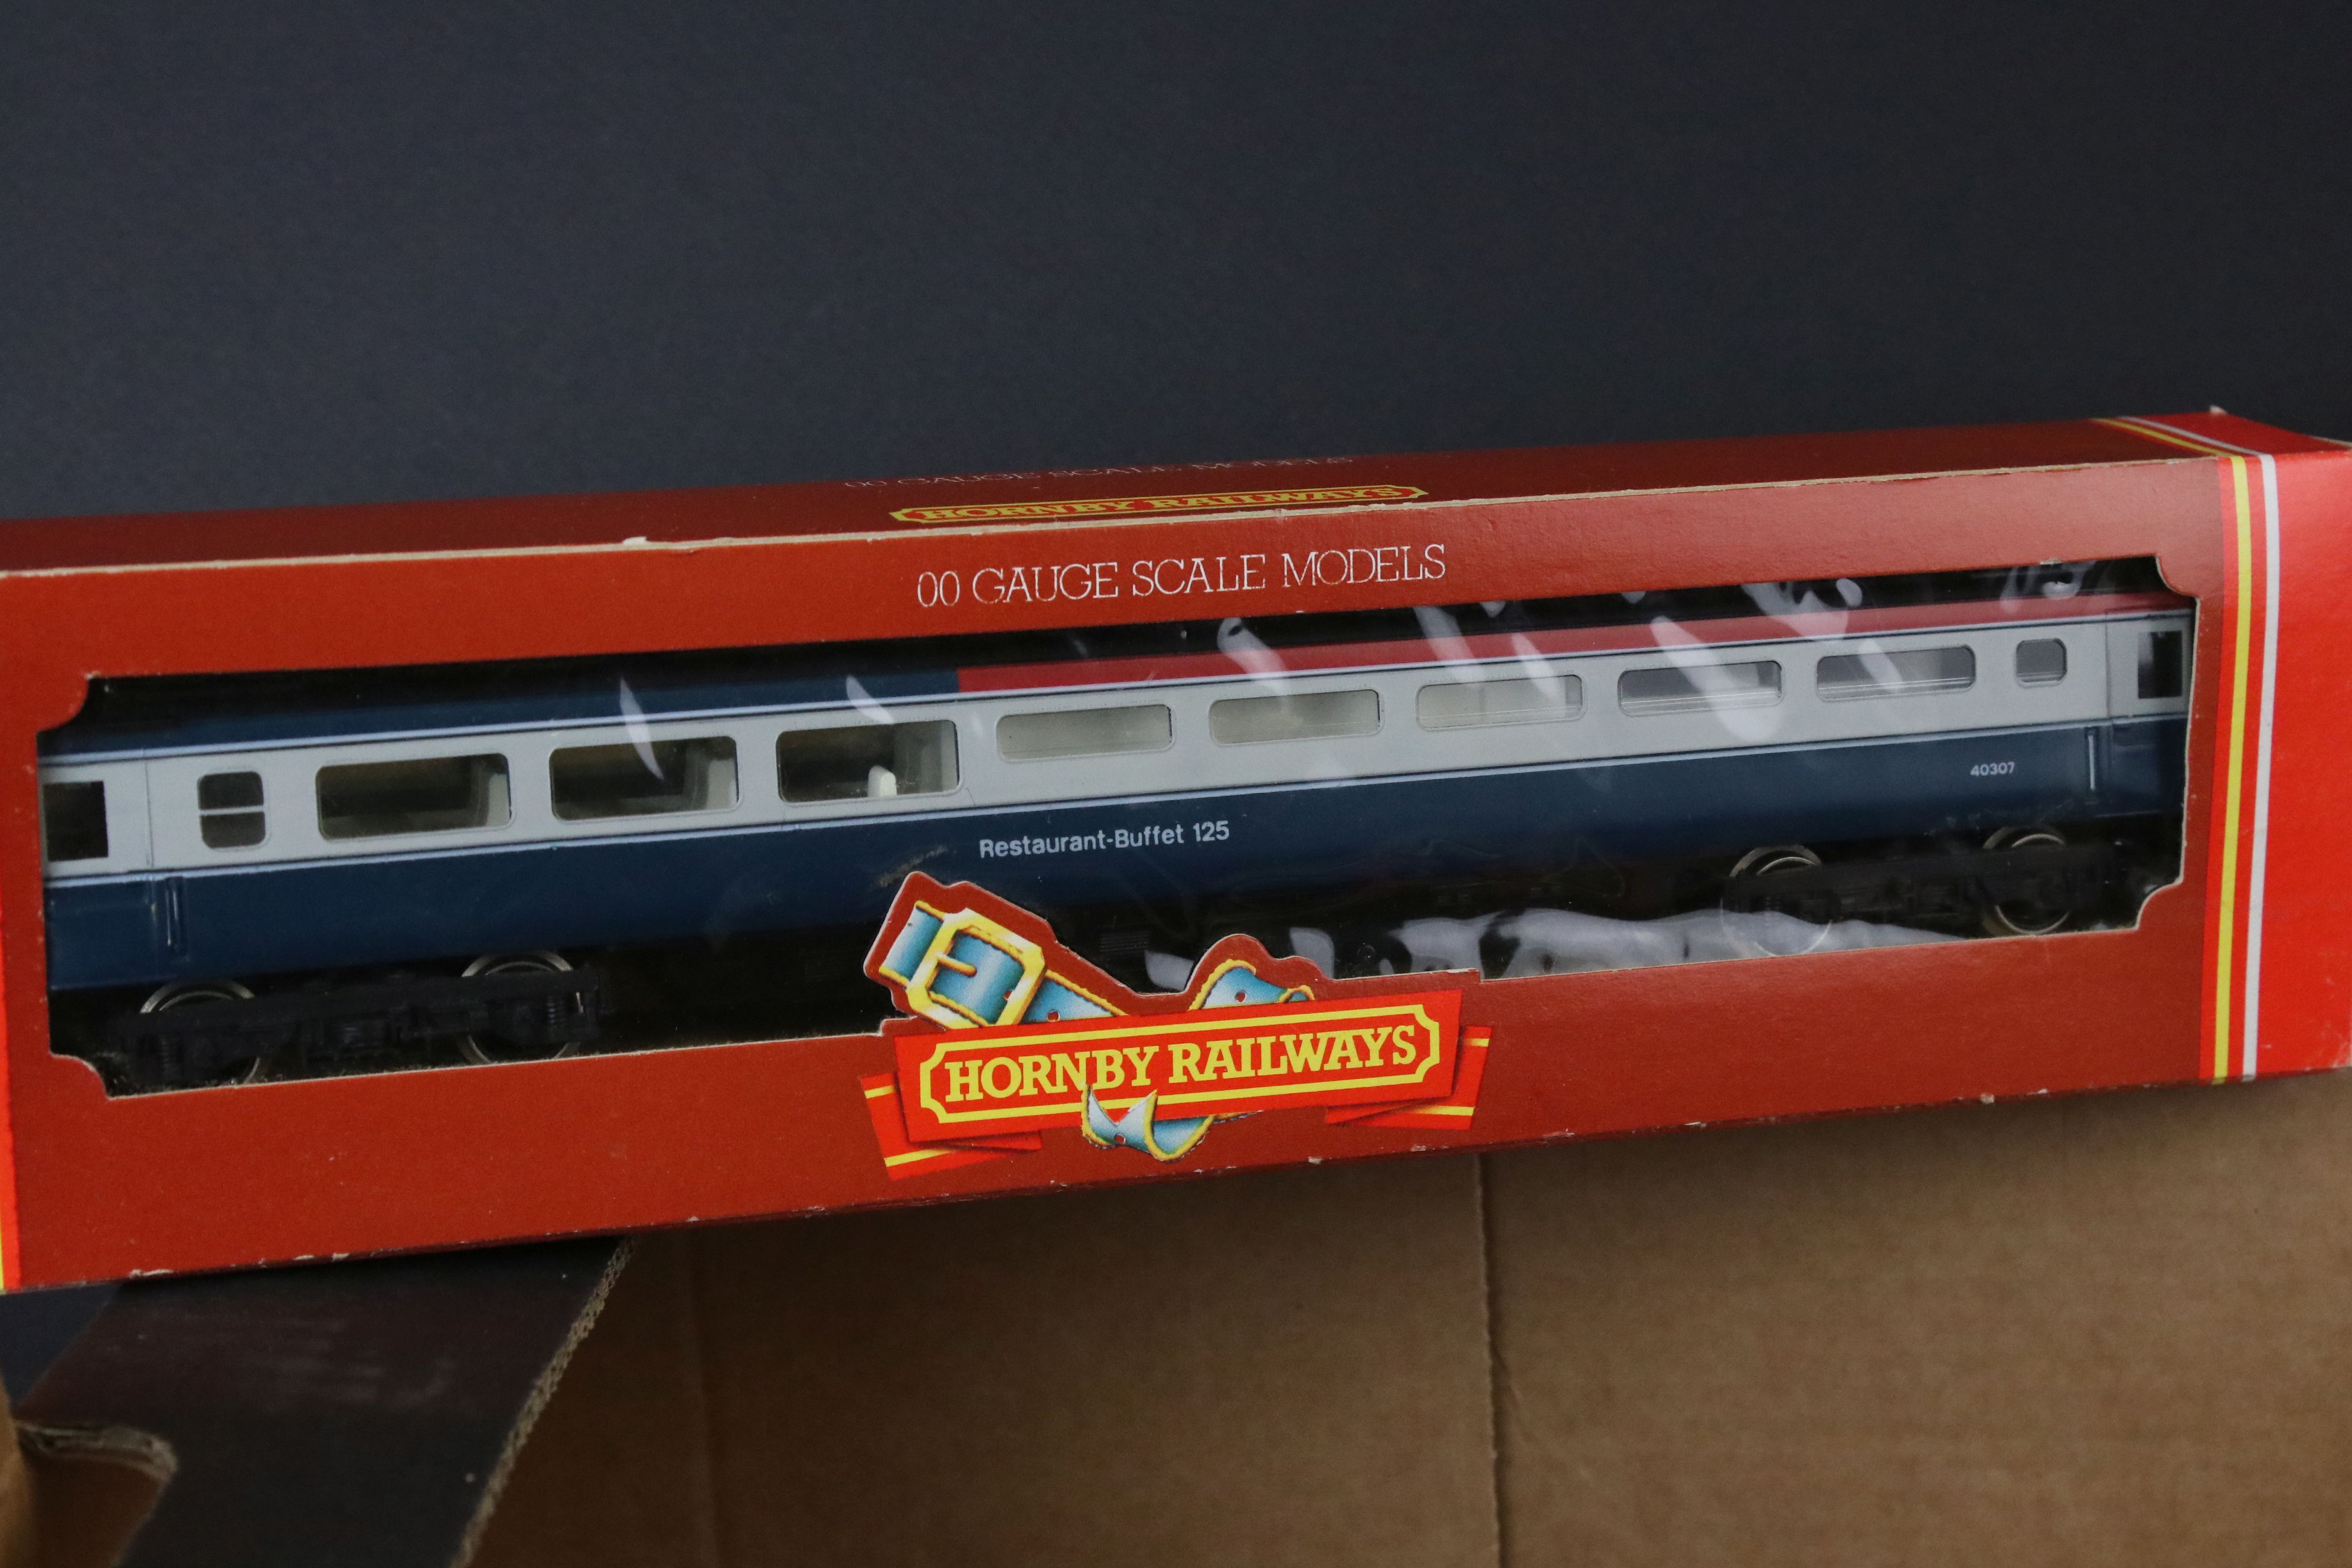 19 OO gauge items of rolling stock to include 3 x boxed Hornby examples (R427, R001 & R029) plus a - Image 4 of 7